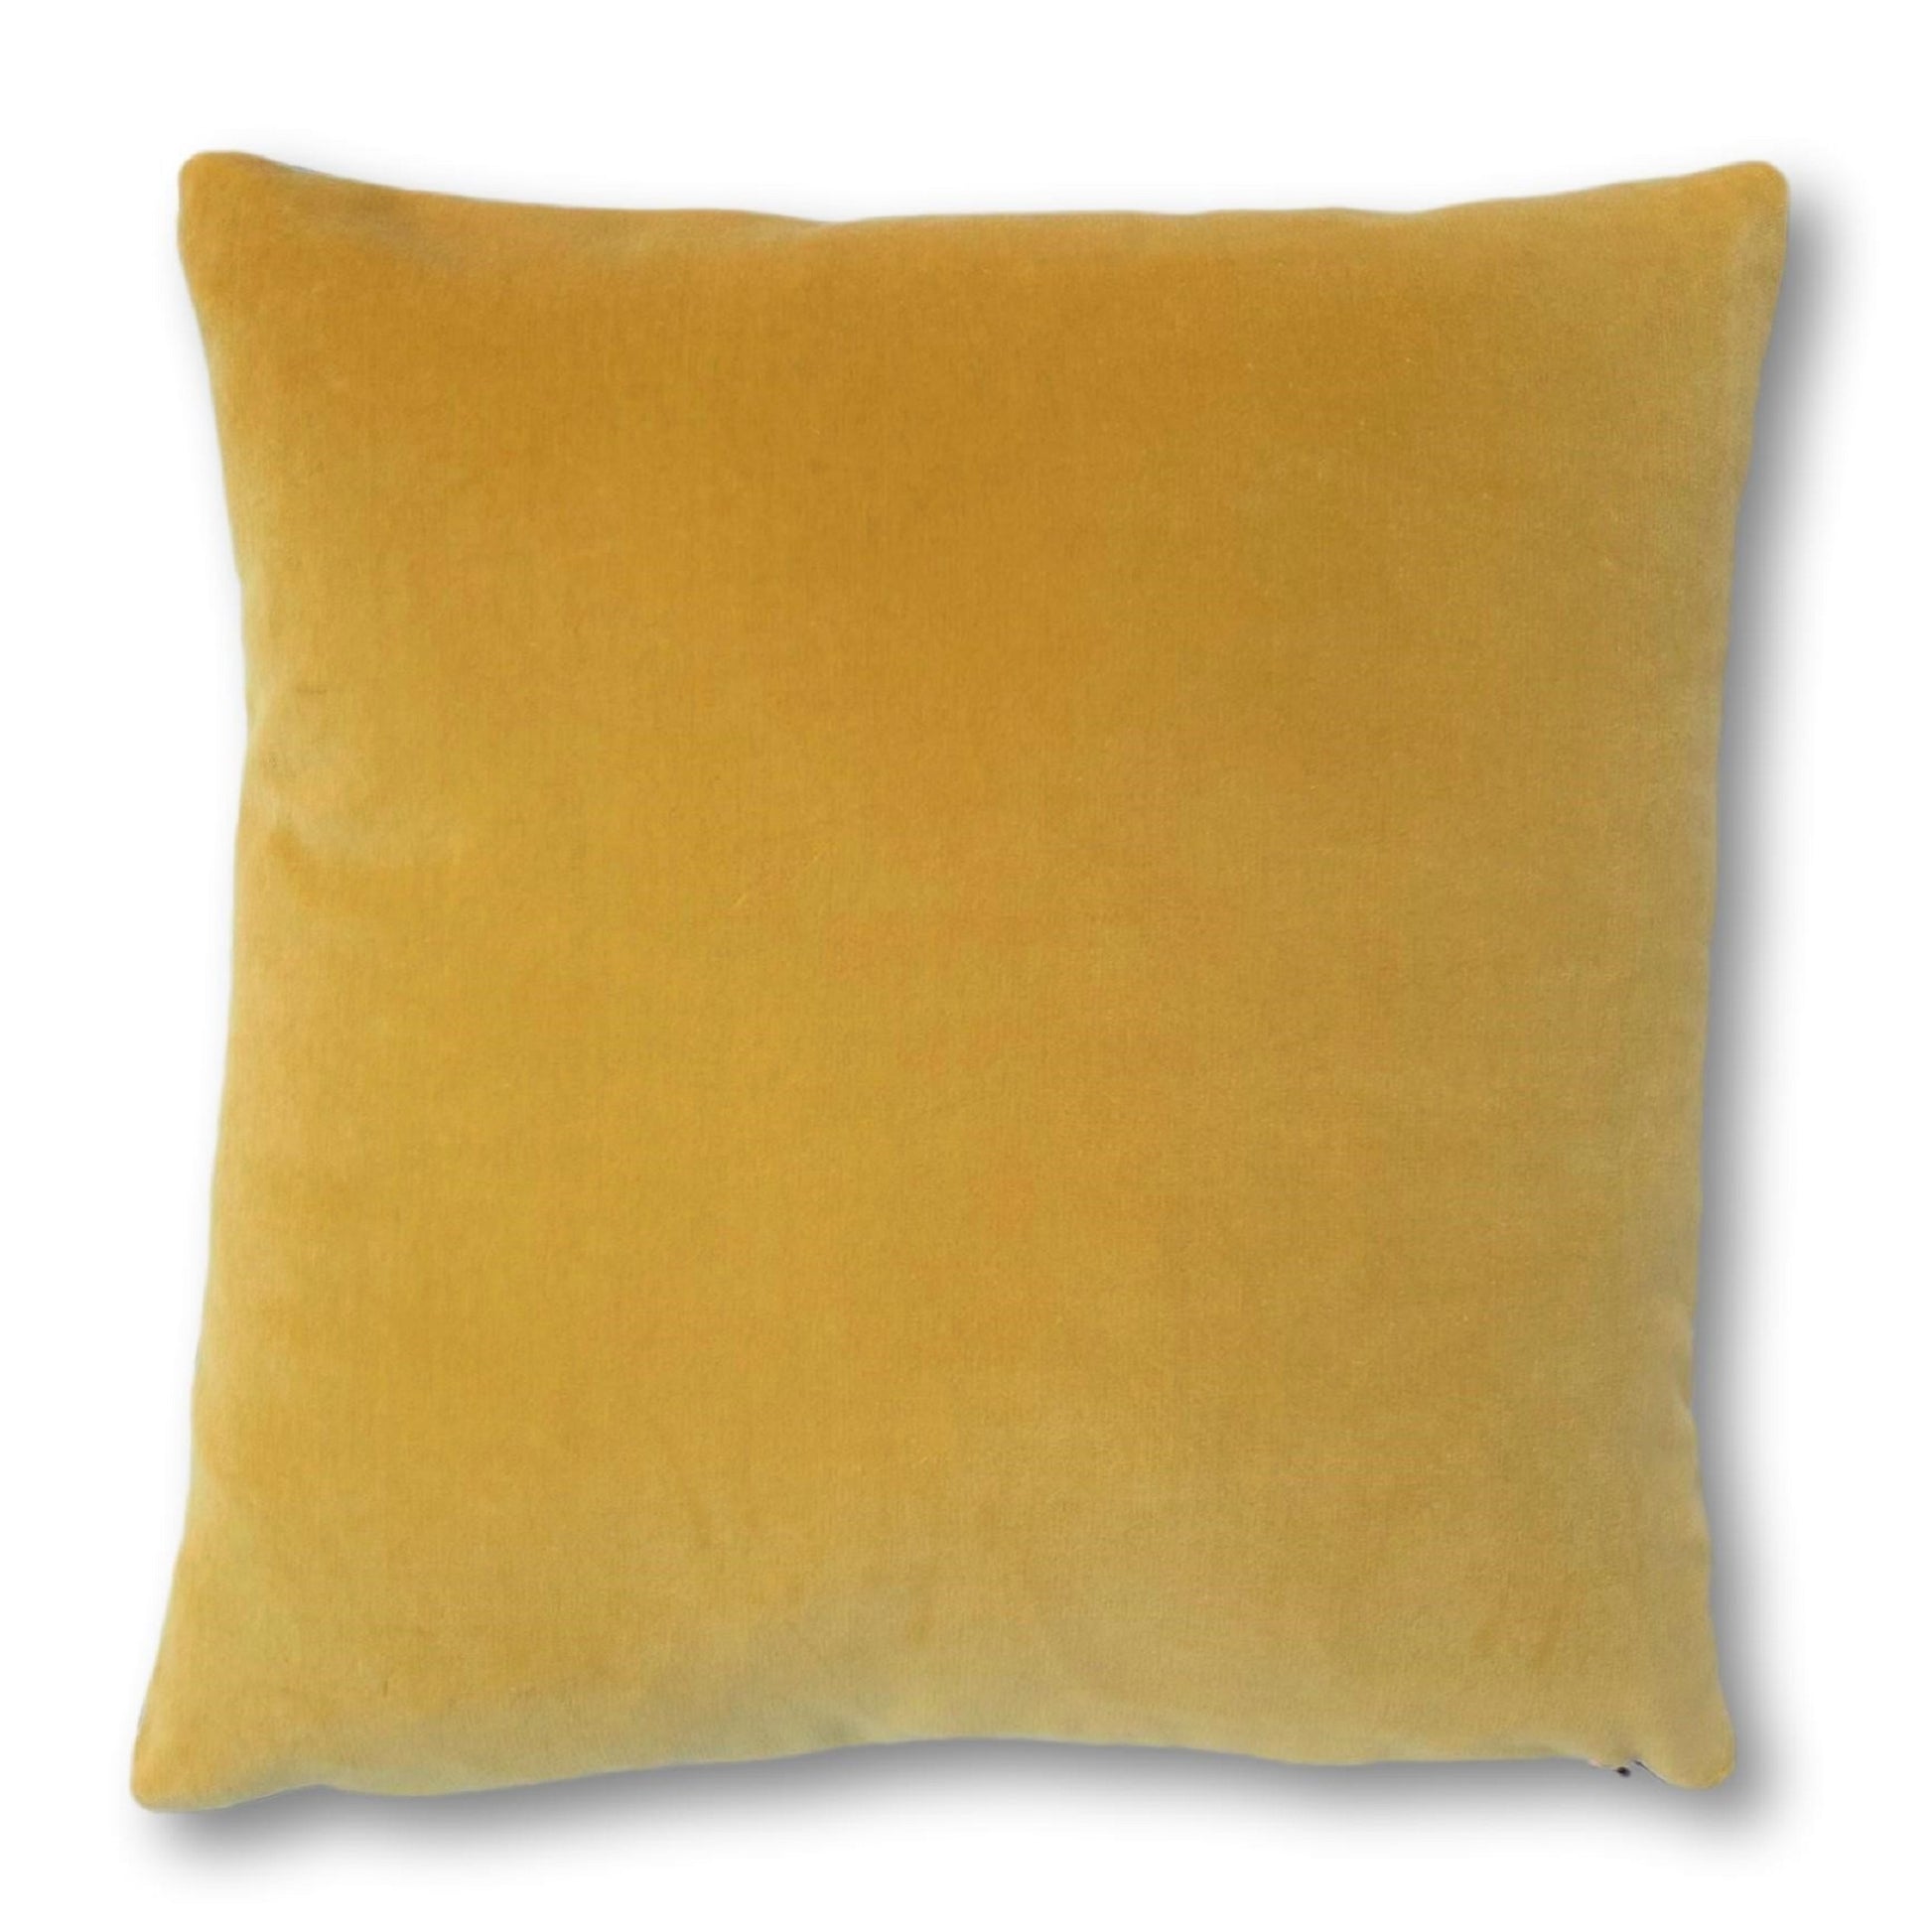 yellow and teal cushions luxe 39